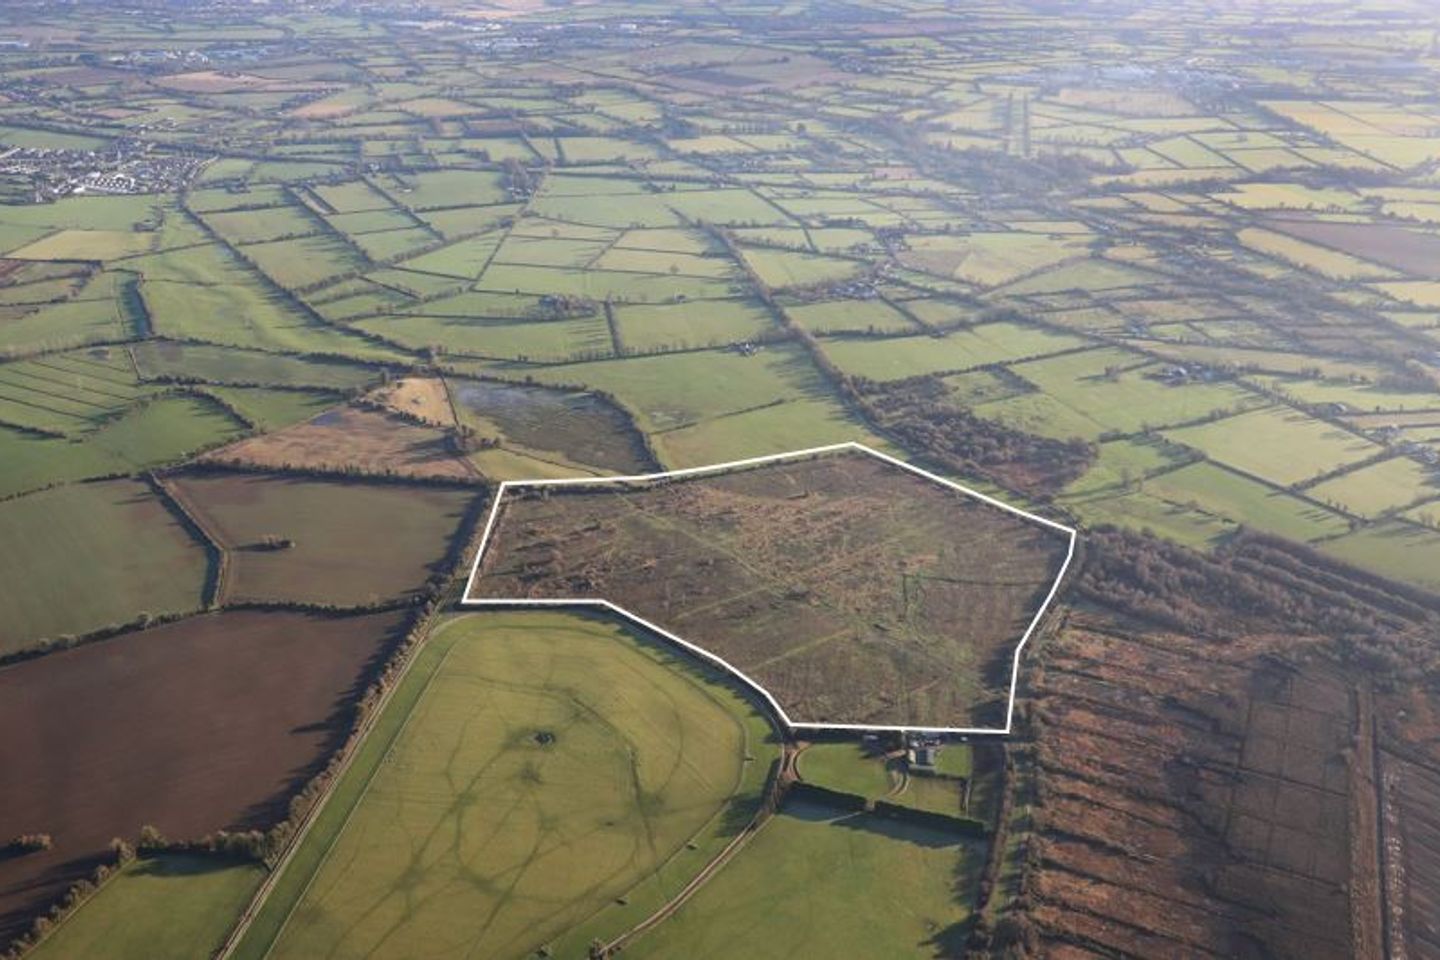 64 Acres, Oldtown Donore, Naas, Co. Kildare